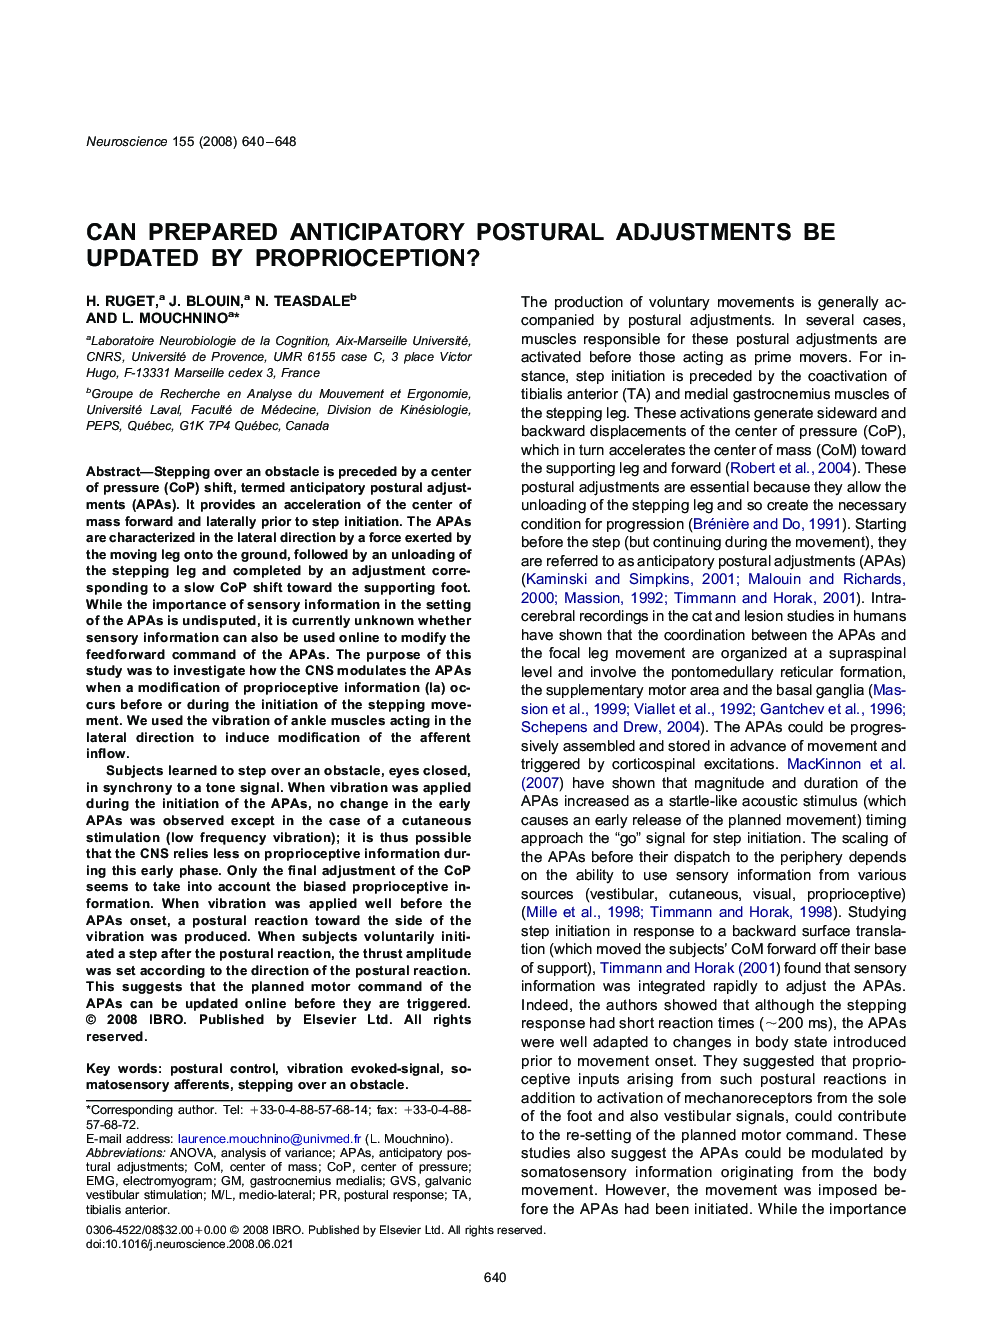 Can prepared anticipatory postural adjustments be updated by proprioception?